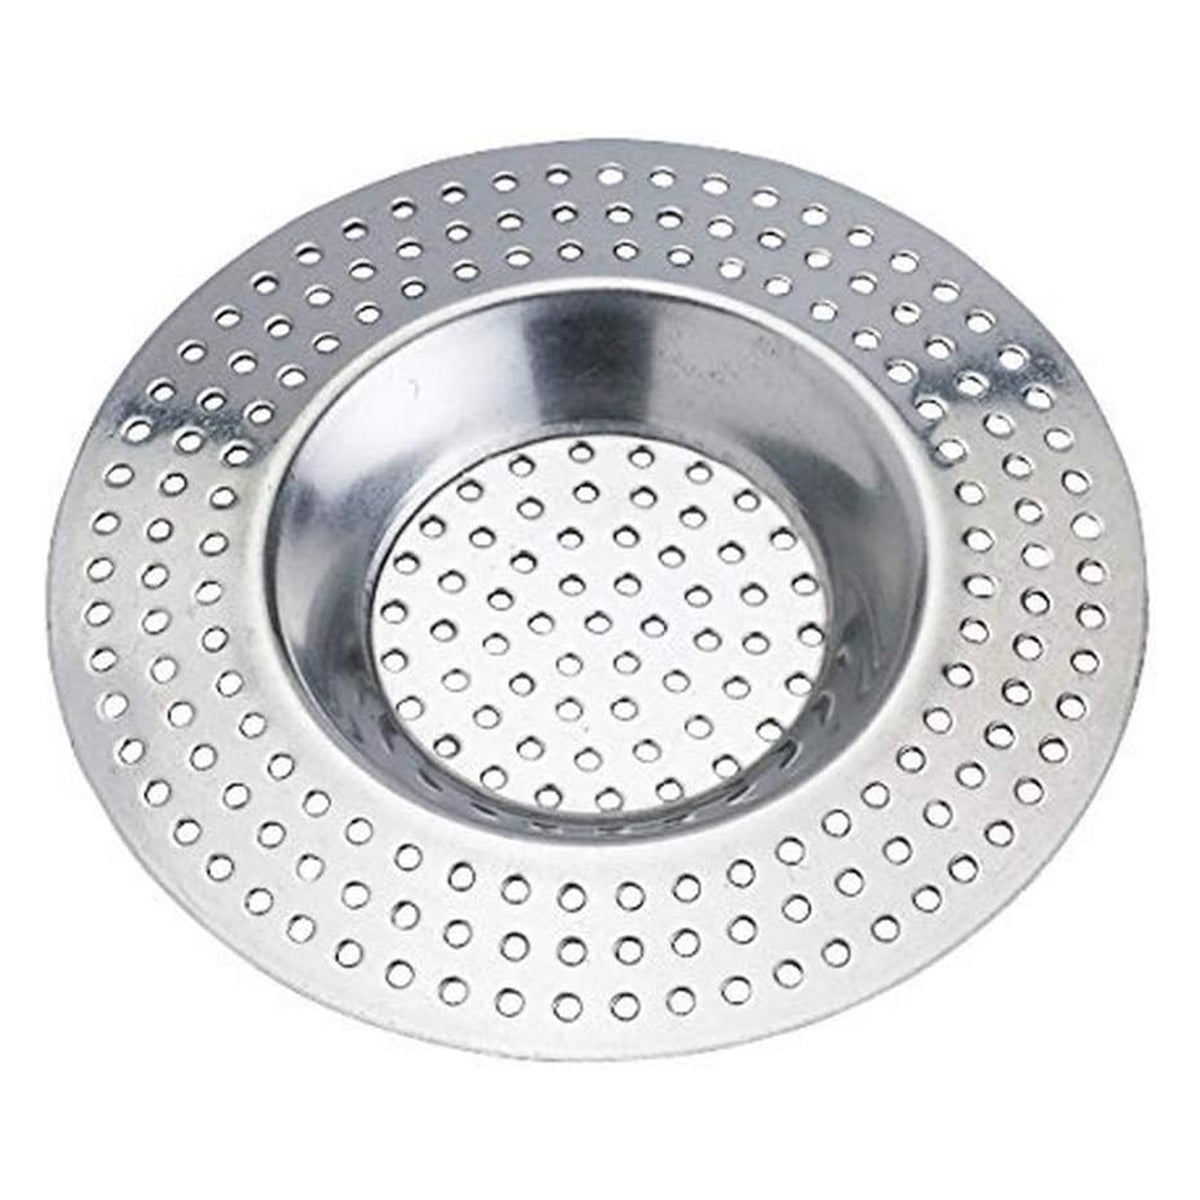 Pack of 2 Stainless Steel Sink Strainers